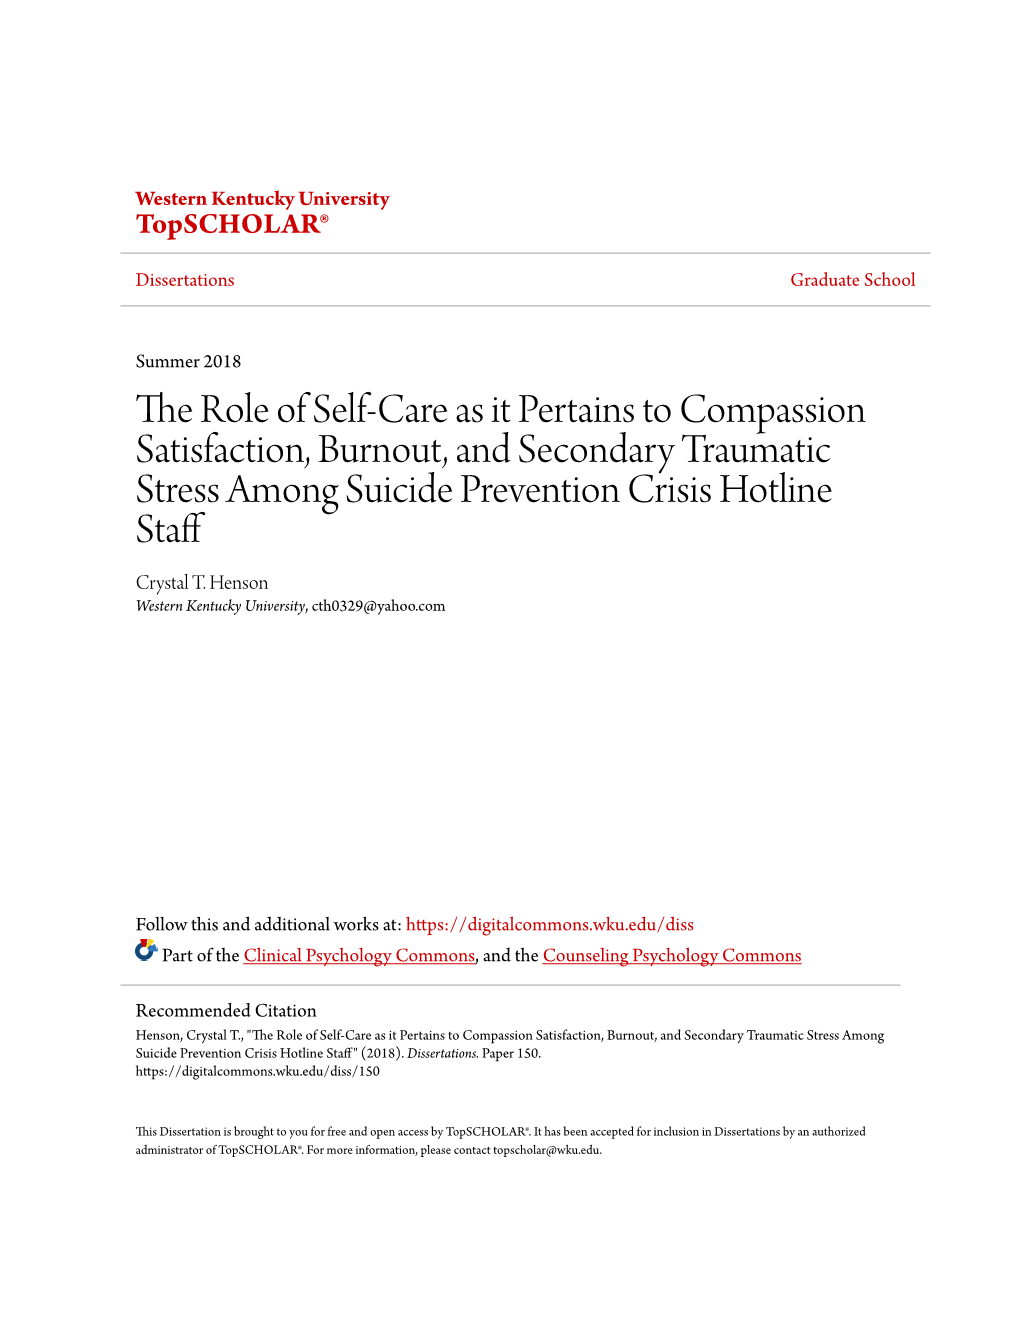 The Role of Self-Care As It Pertains to Compassion Satisfaction, Burnout, and Secondary Traumatic Stress Among Suicide Prevention Crisis Hotline Staff Crystal T